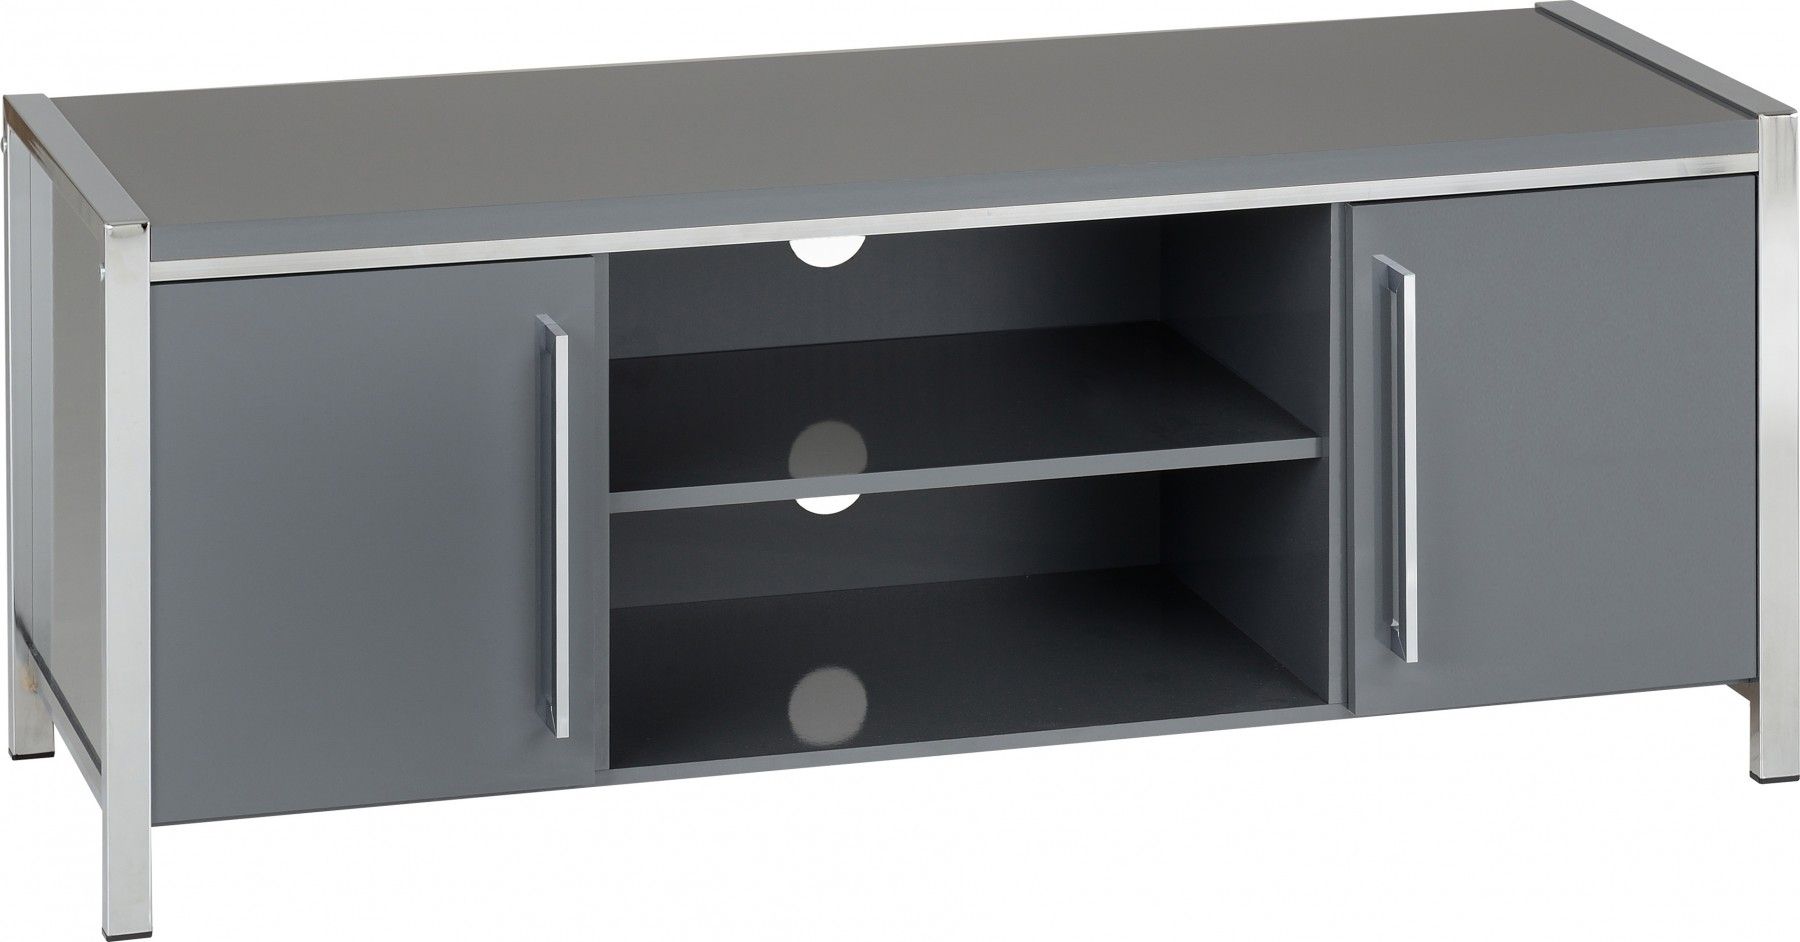 Charisma 2 Door Tv Unit In Grey Gloss/chrome – Flanagans Throughout Charisma Tv Stands (View 7 of 15)